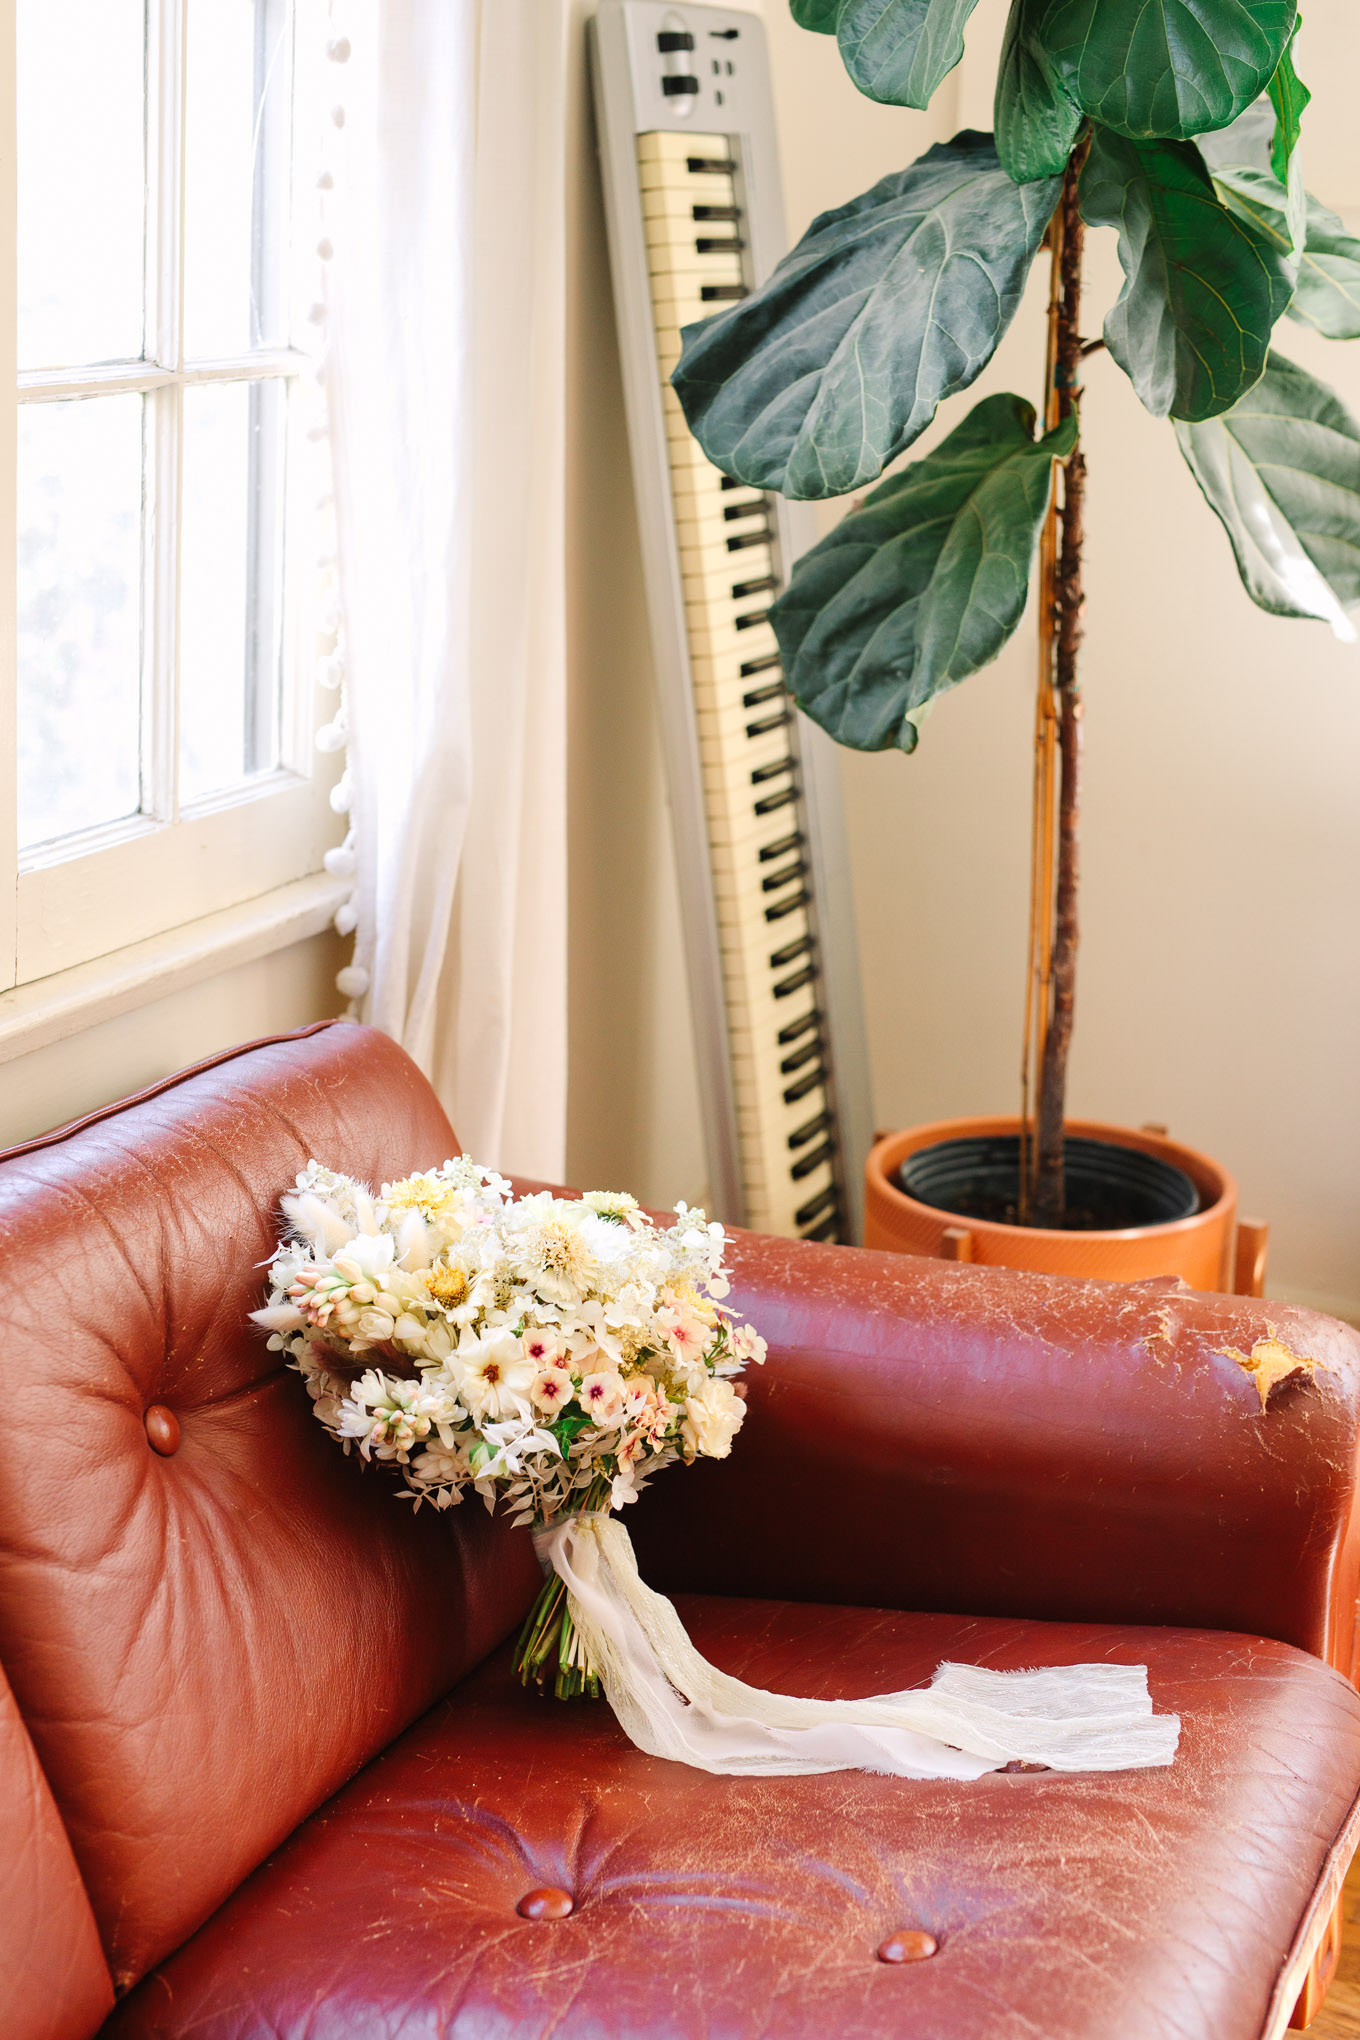 Neutral boho wedding bouquet on leather couch | Los Angeles Arboretum Elopement | Colorful and elevated wedding photography for fun-loving couples in Southern California | #LosAngelesElopement #elopement #LAarboretum #LAskyline #elopementphotos   Source: Mary Costa Photography | Los Angeles